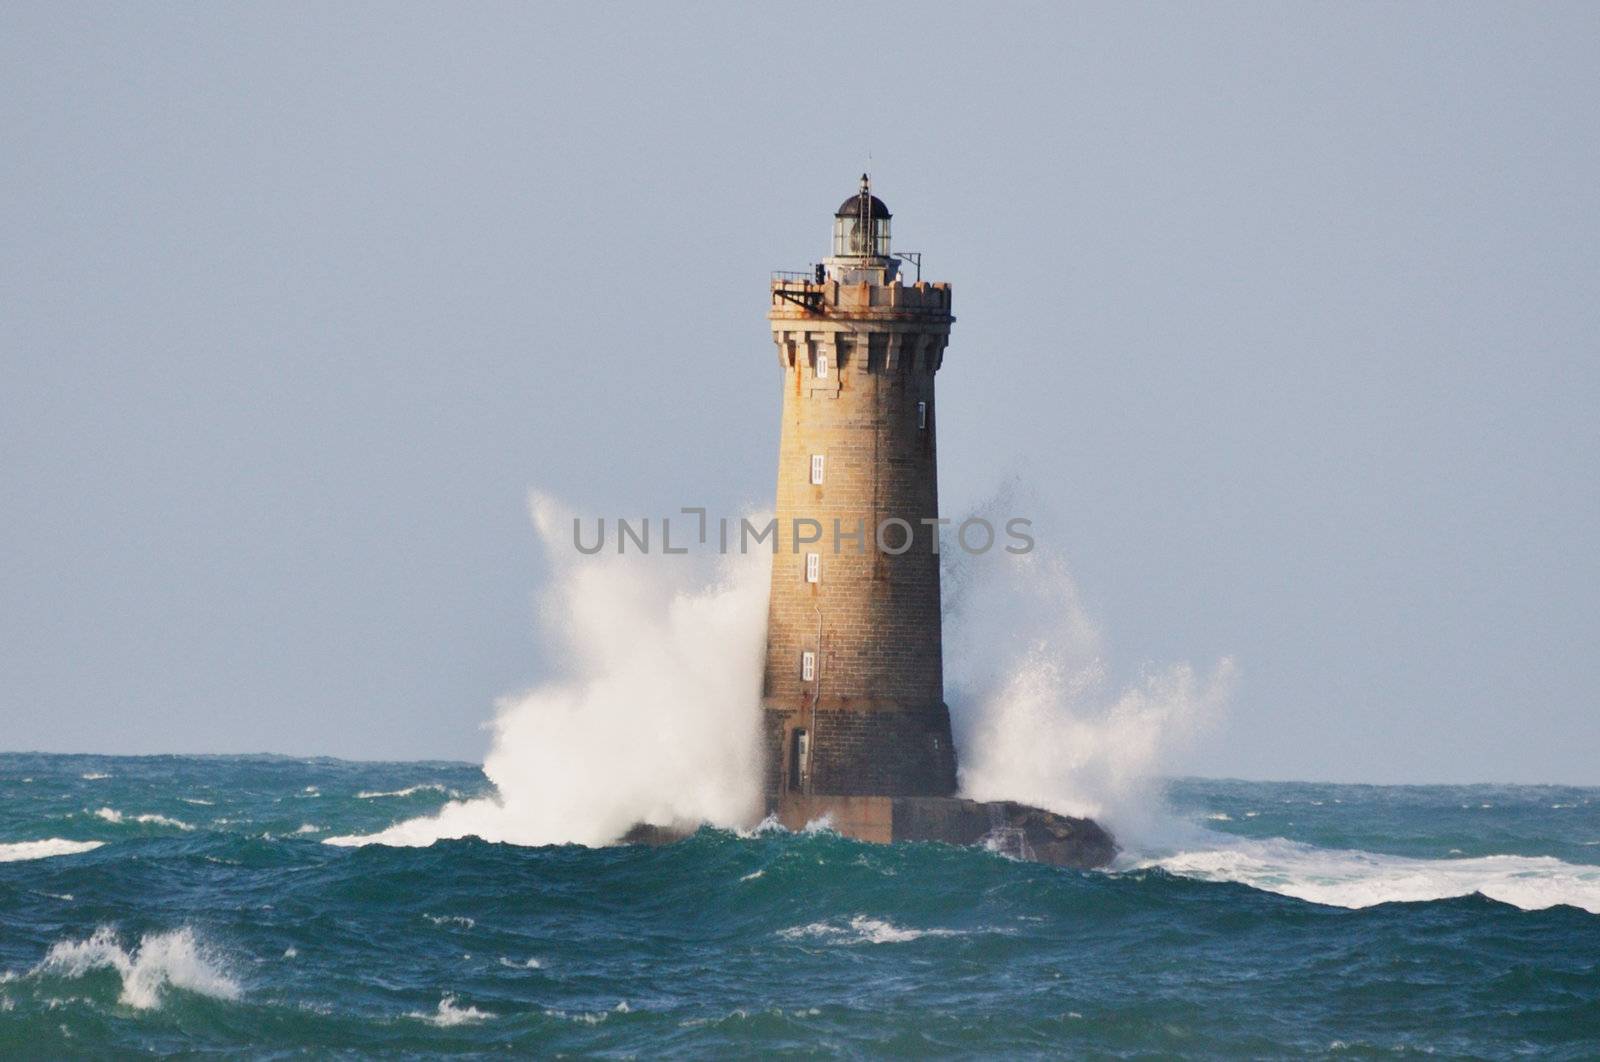 Lighthouse called "Le phare du four" in Tremazan in Brittany, France during storm in November